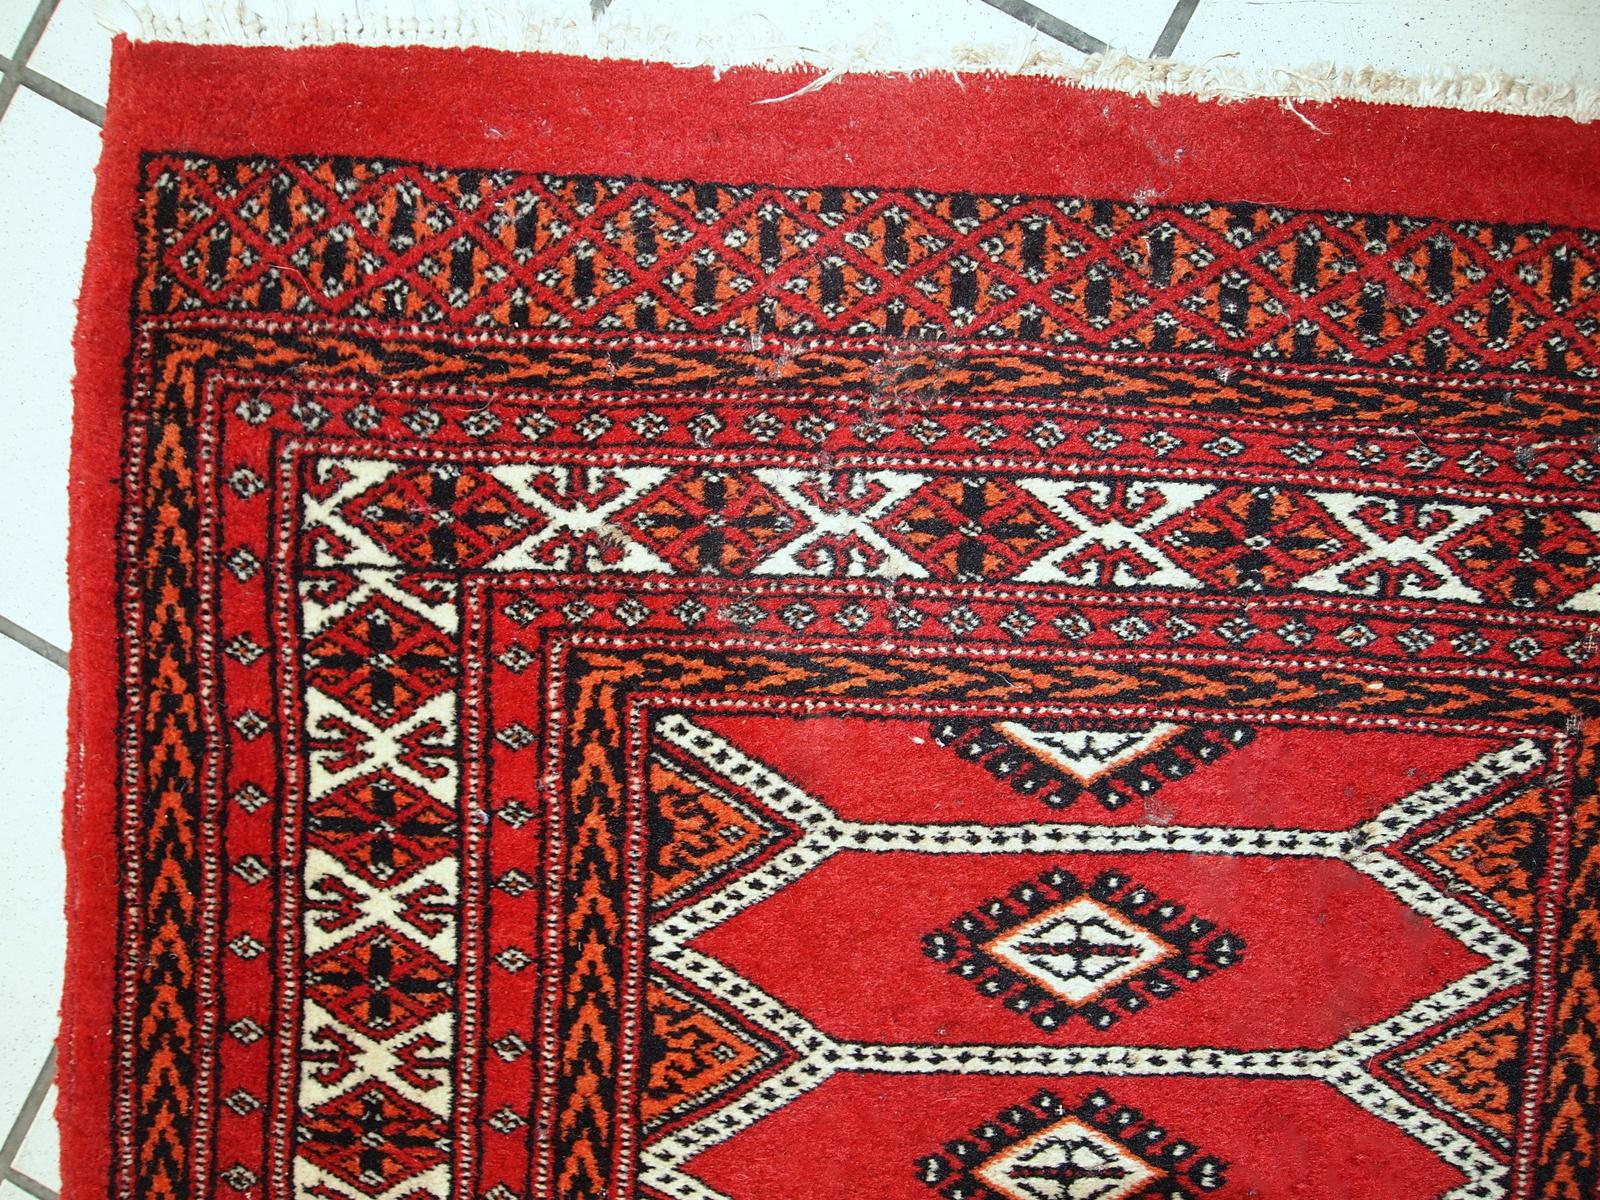 Vintage rug from Pakistan in distressed condition. The rug made in the end of 20th century in red wool.

-condition: distressed,

-circa: 1960s,

-size: 2.6' x 4.7' (81cm x 145cm),

-material: wool,

-country of origin: